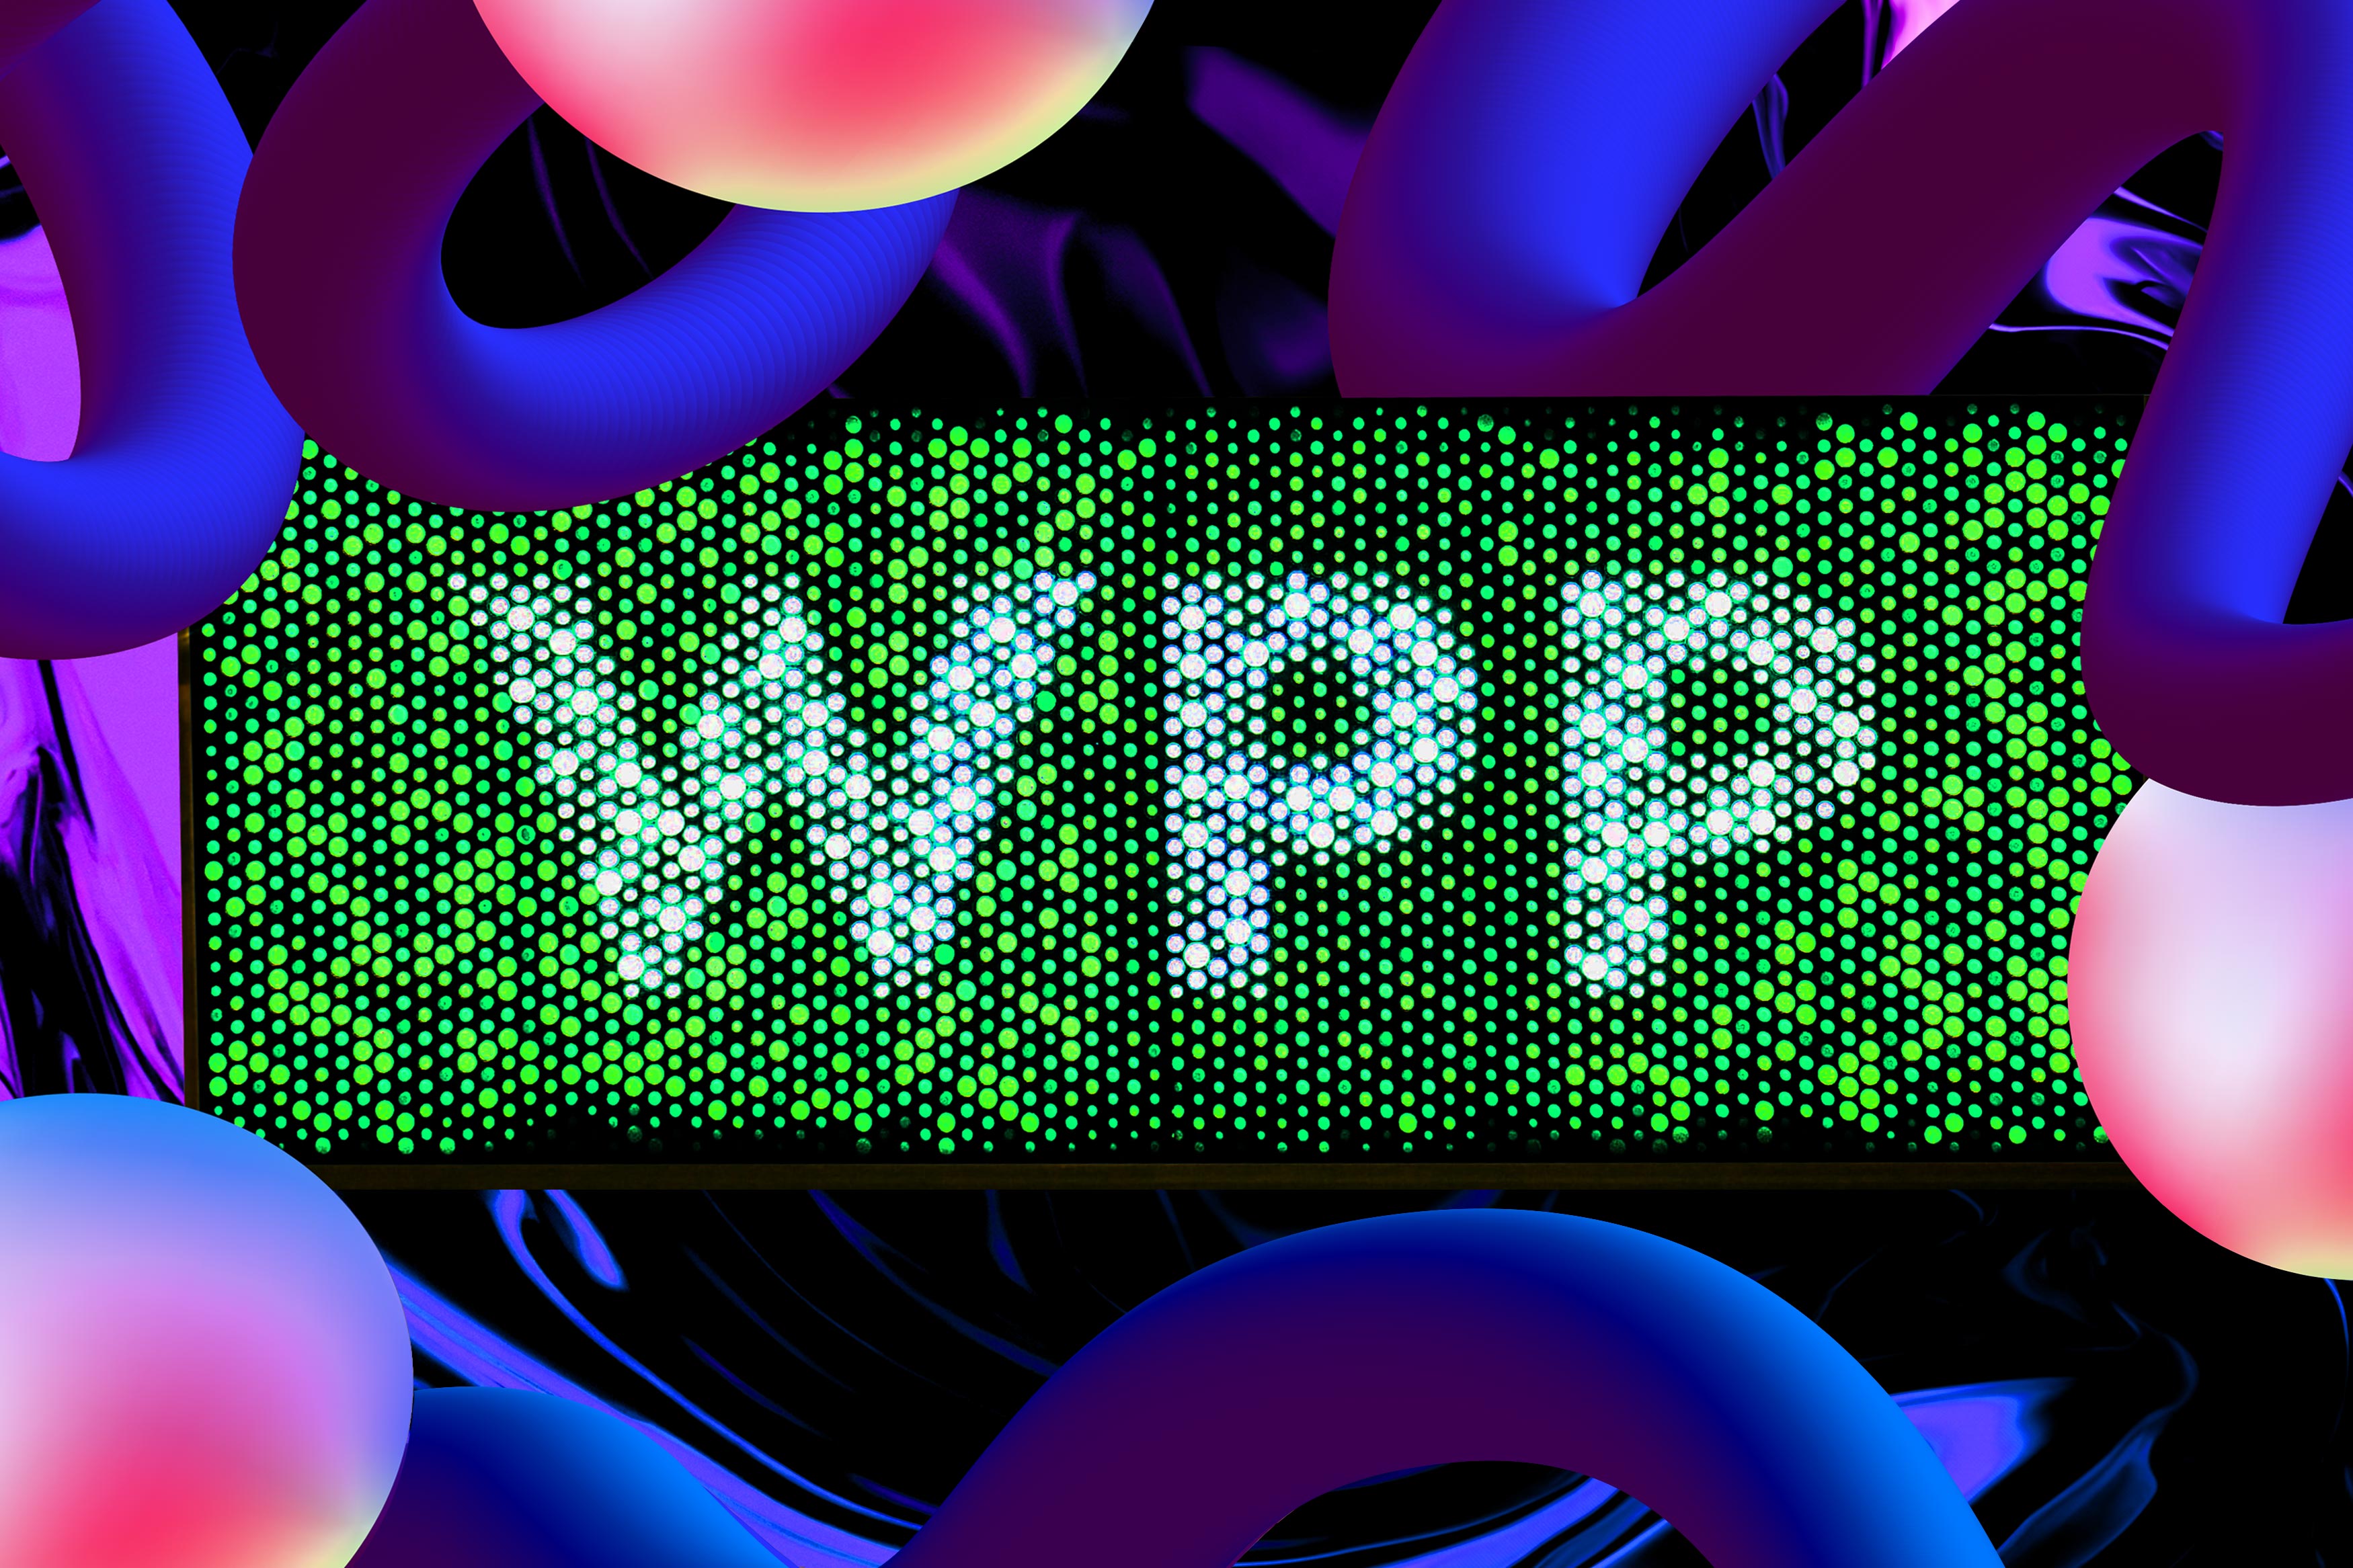 WPP logo on green background surrounded by shapes